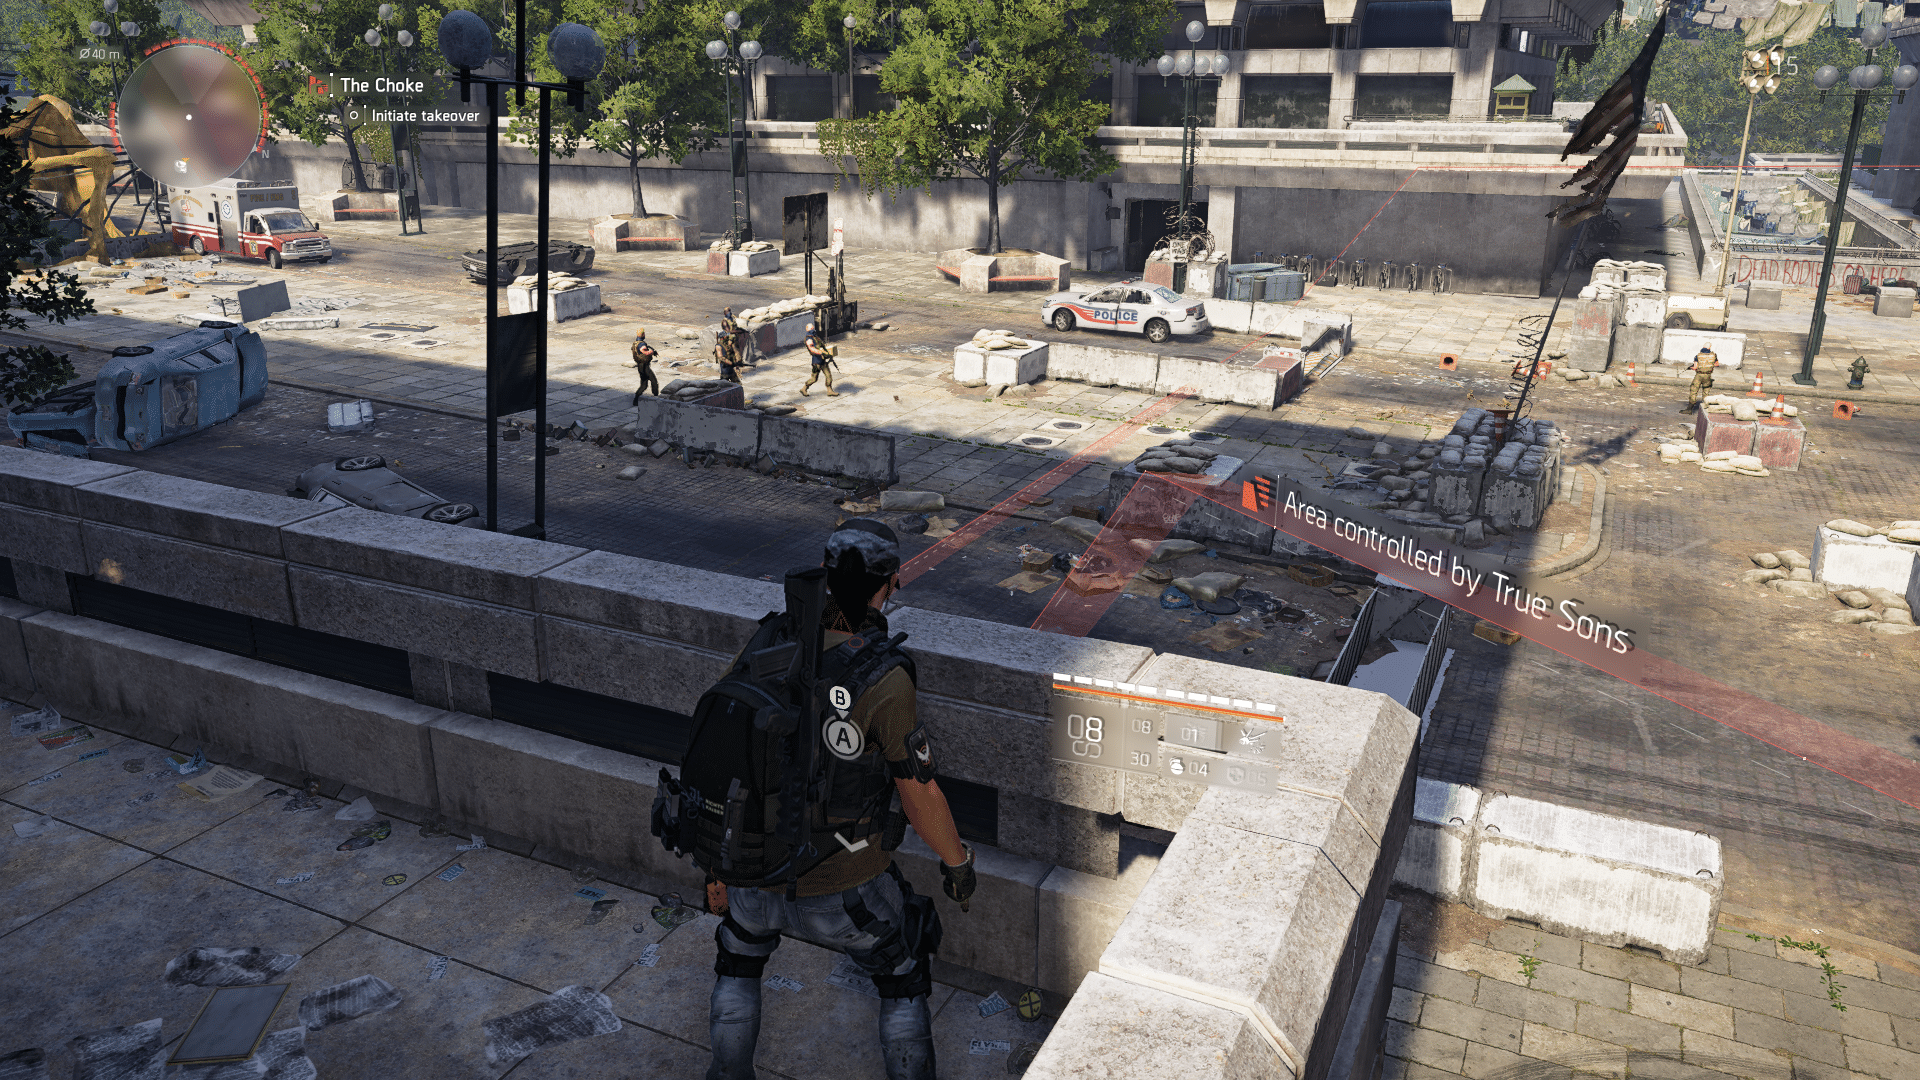 TheDivision2 4 7 2019 8 43 53 PM 348